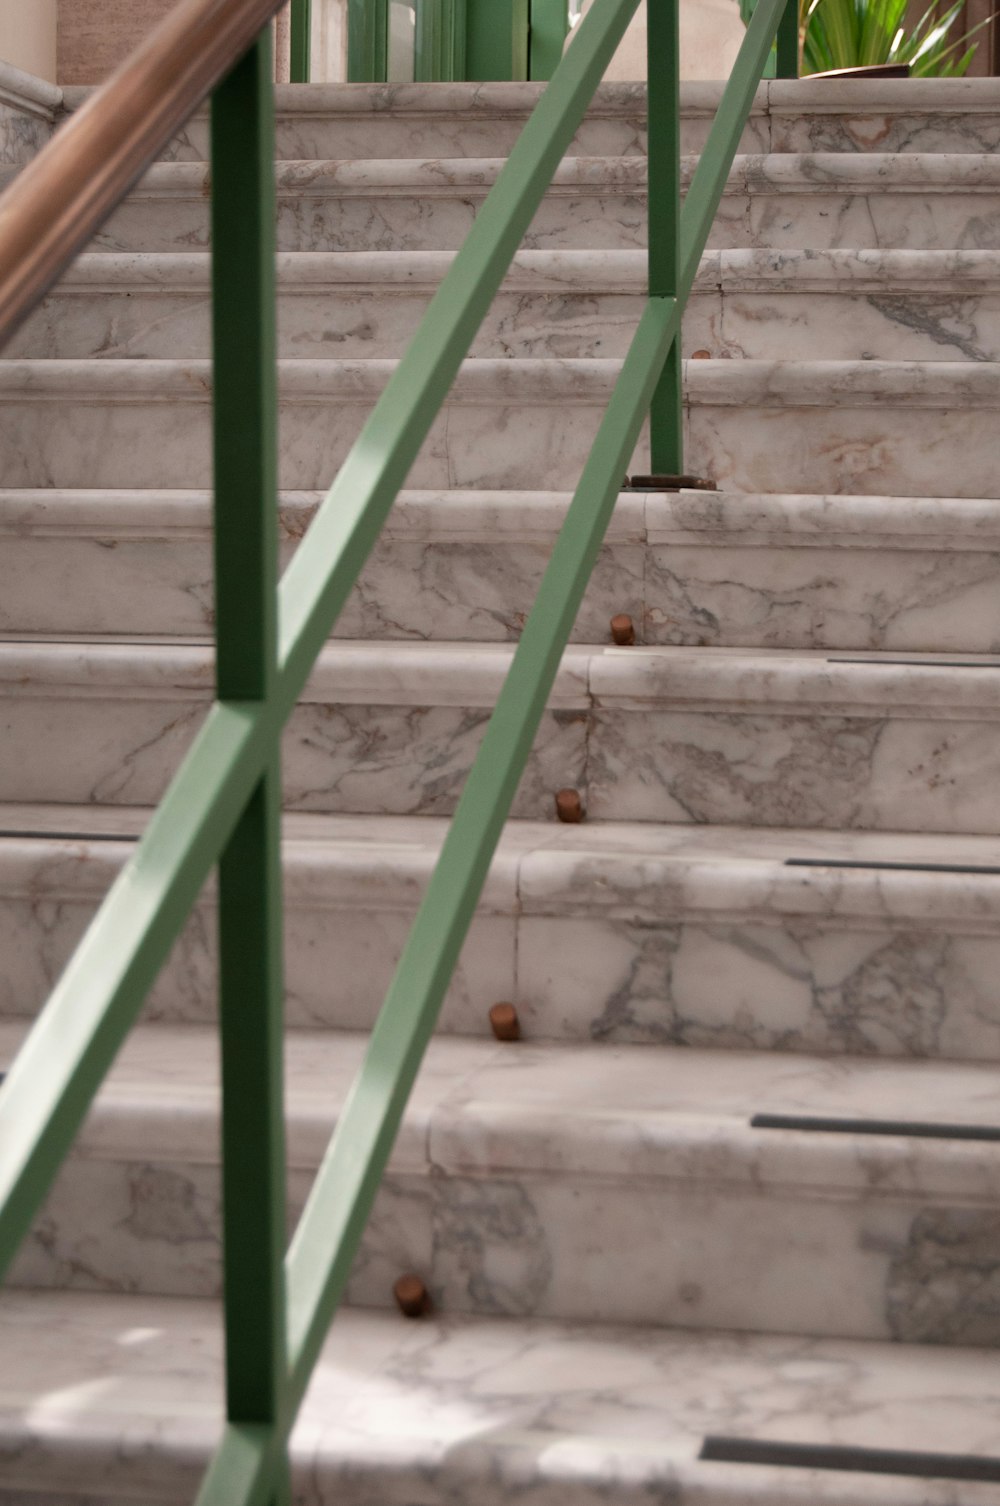 a marble staircase with green handrails in a building